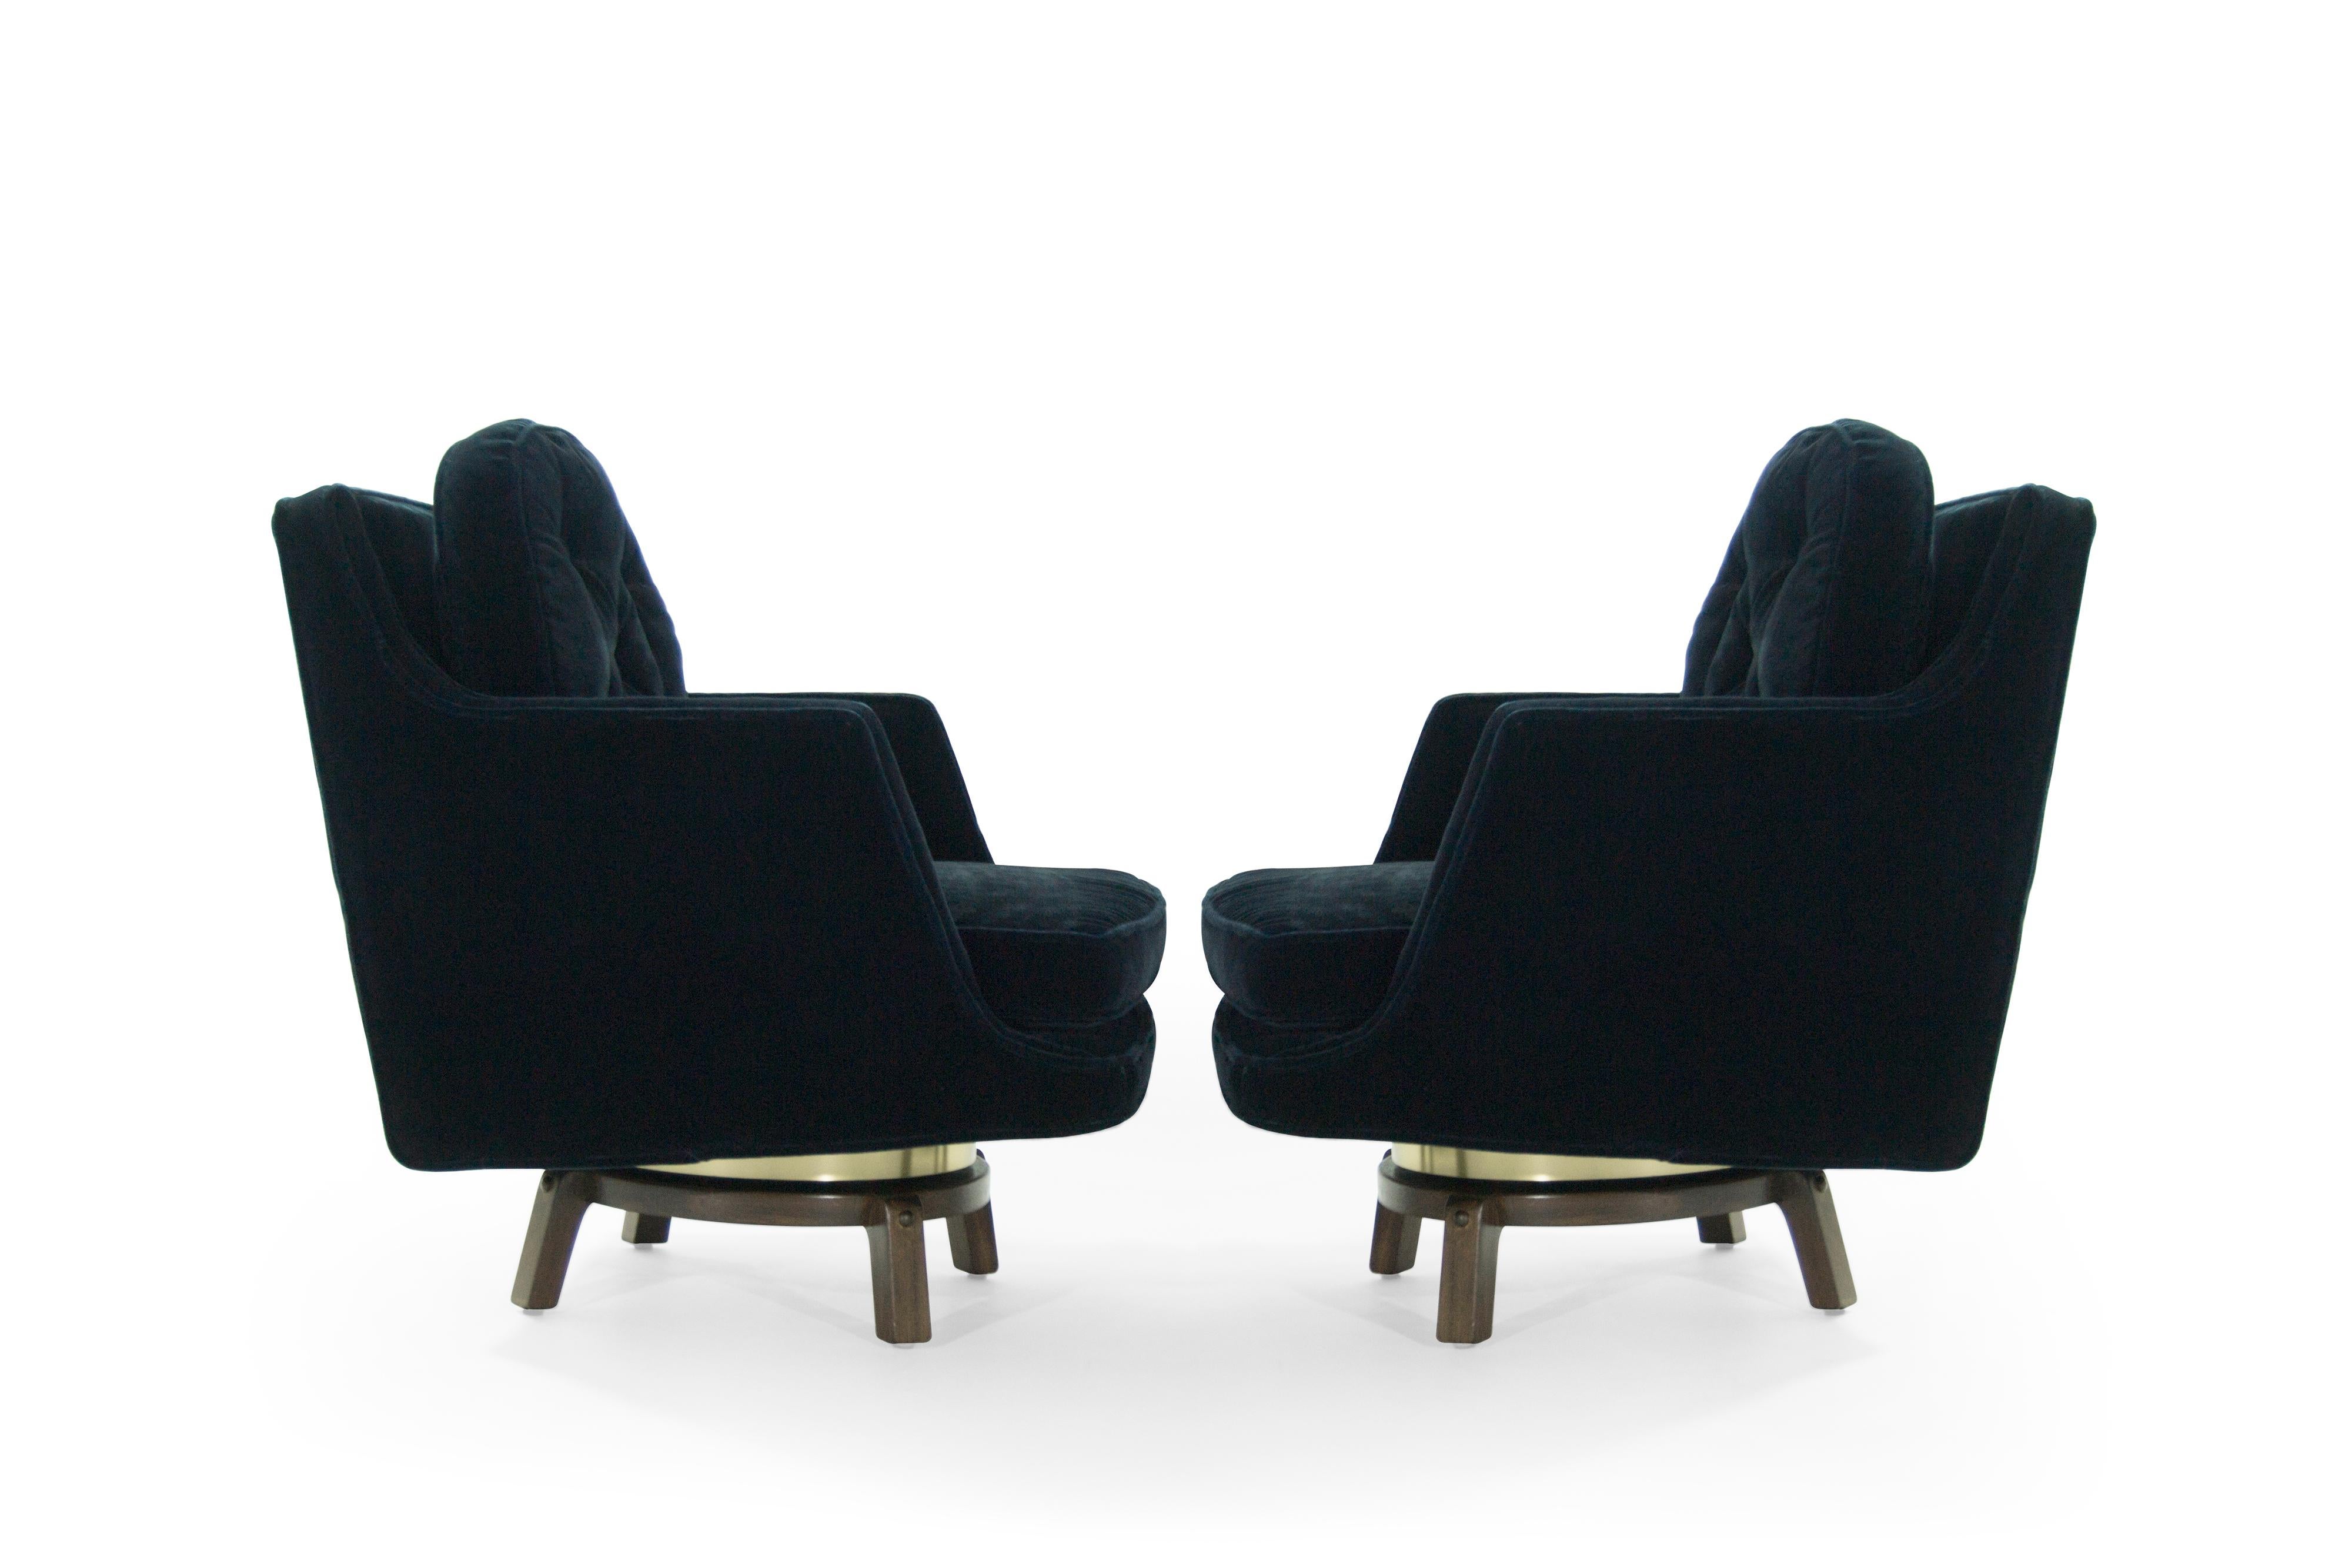 Pair of swivel lounge chairs designed by Edward Wormley for Dunbar, circa 1950s.

Re-upholstered in midnight blue mohair, fully restored walnut legs. Newly fitted polished brass ring.